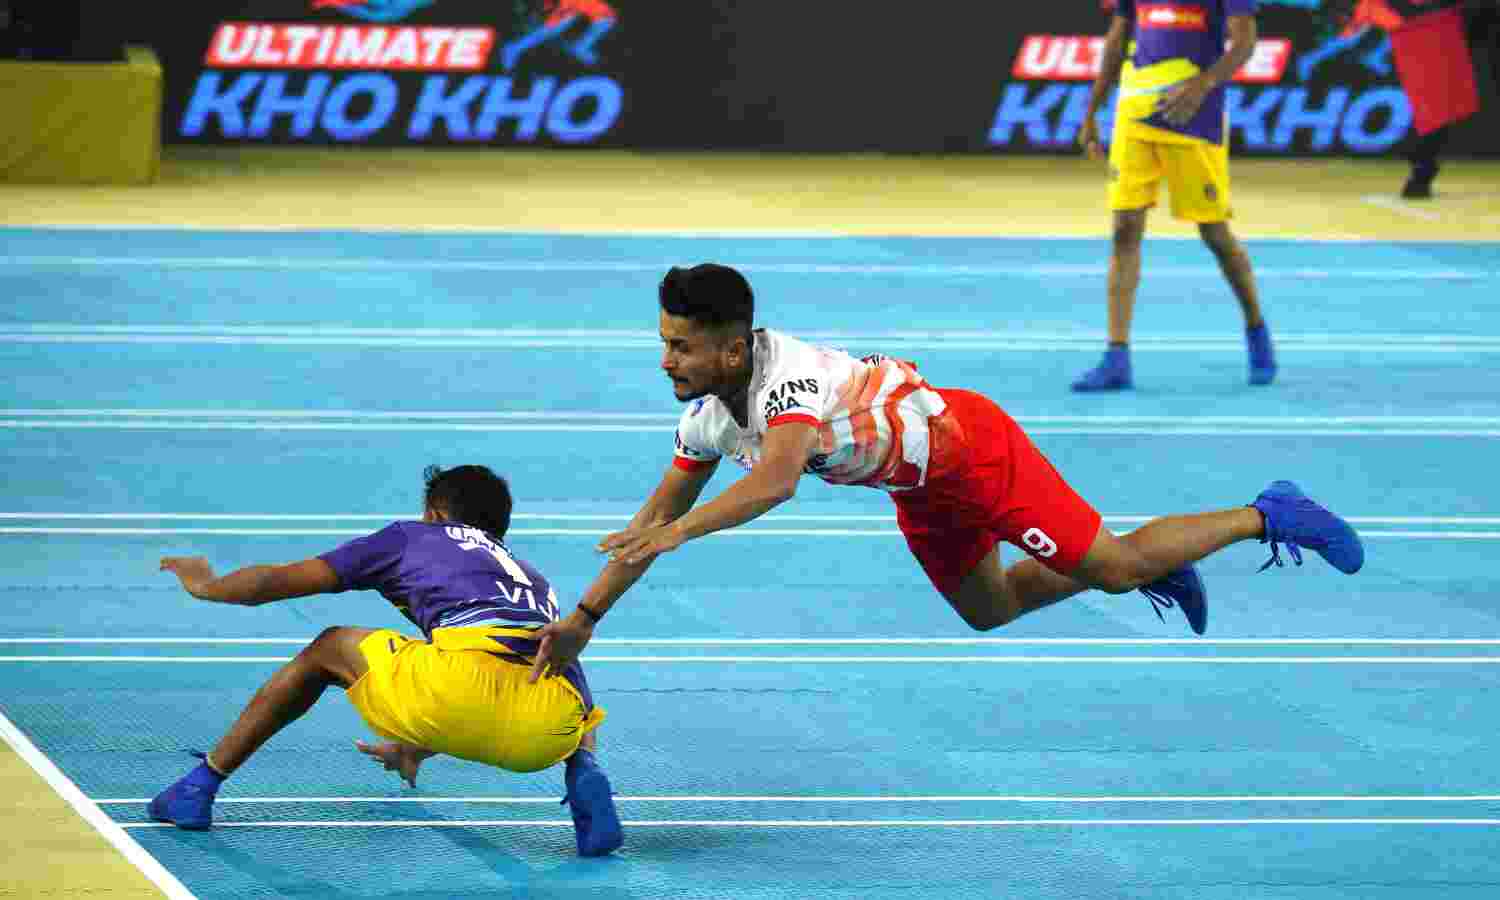 Ultimate Kho Kho Which teams will play in playoffs?